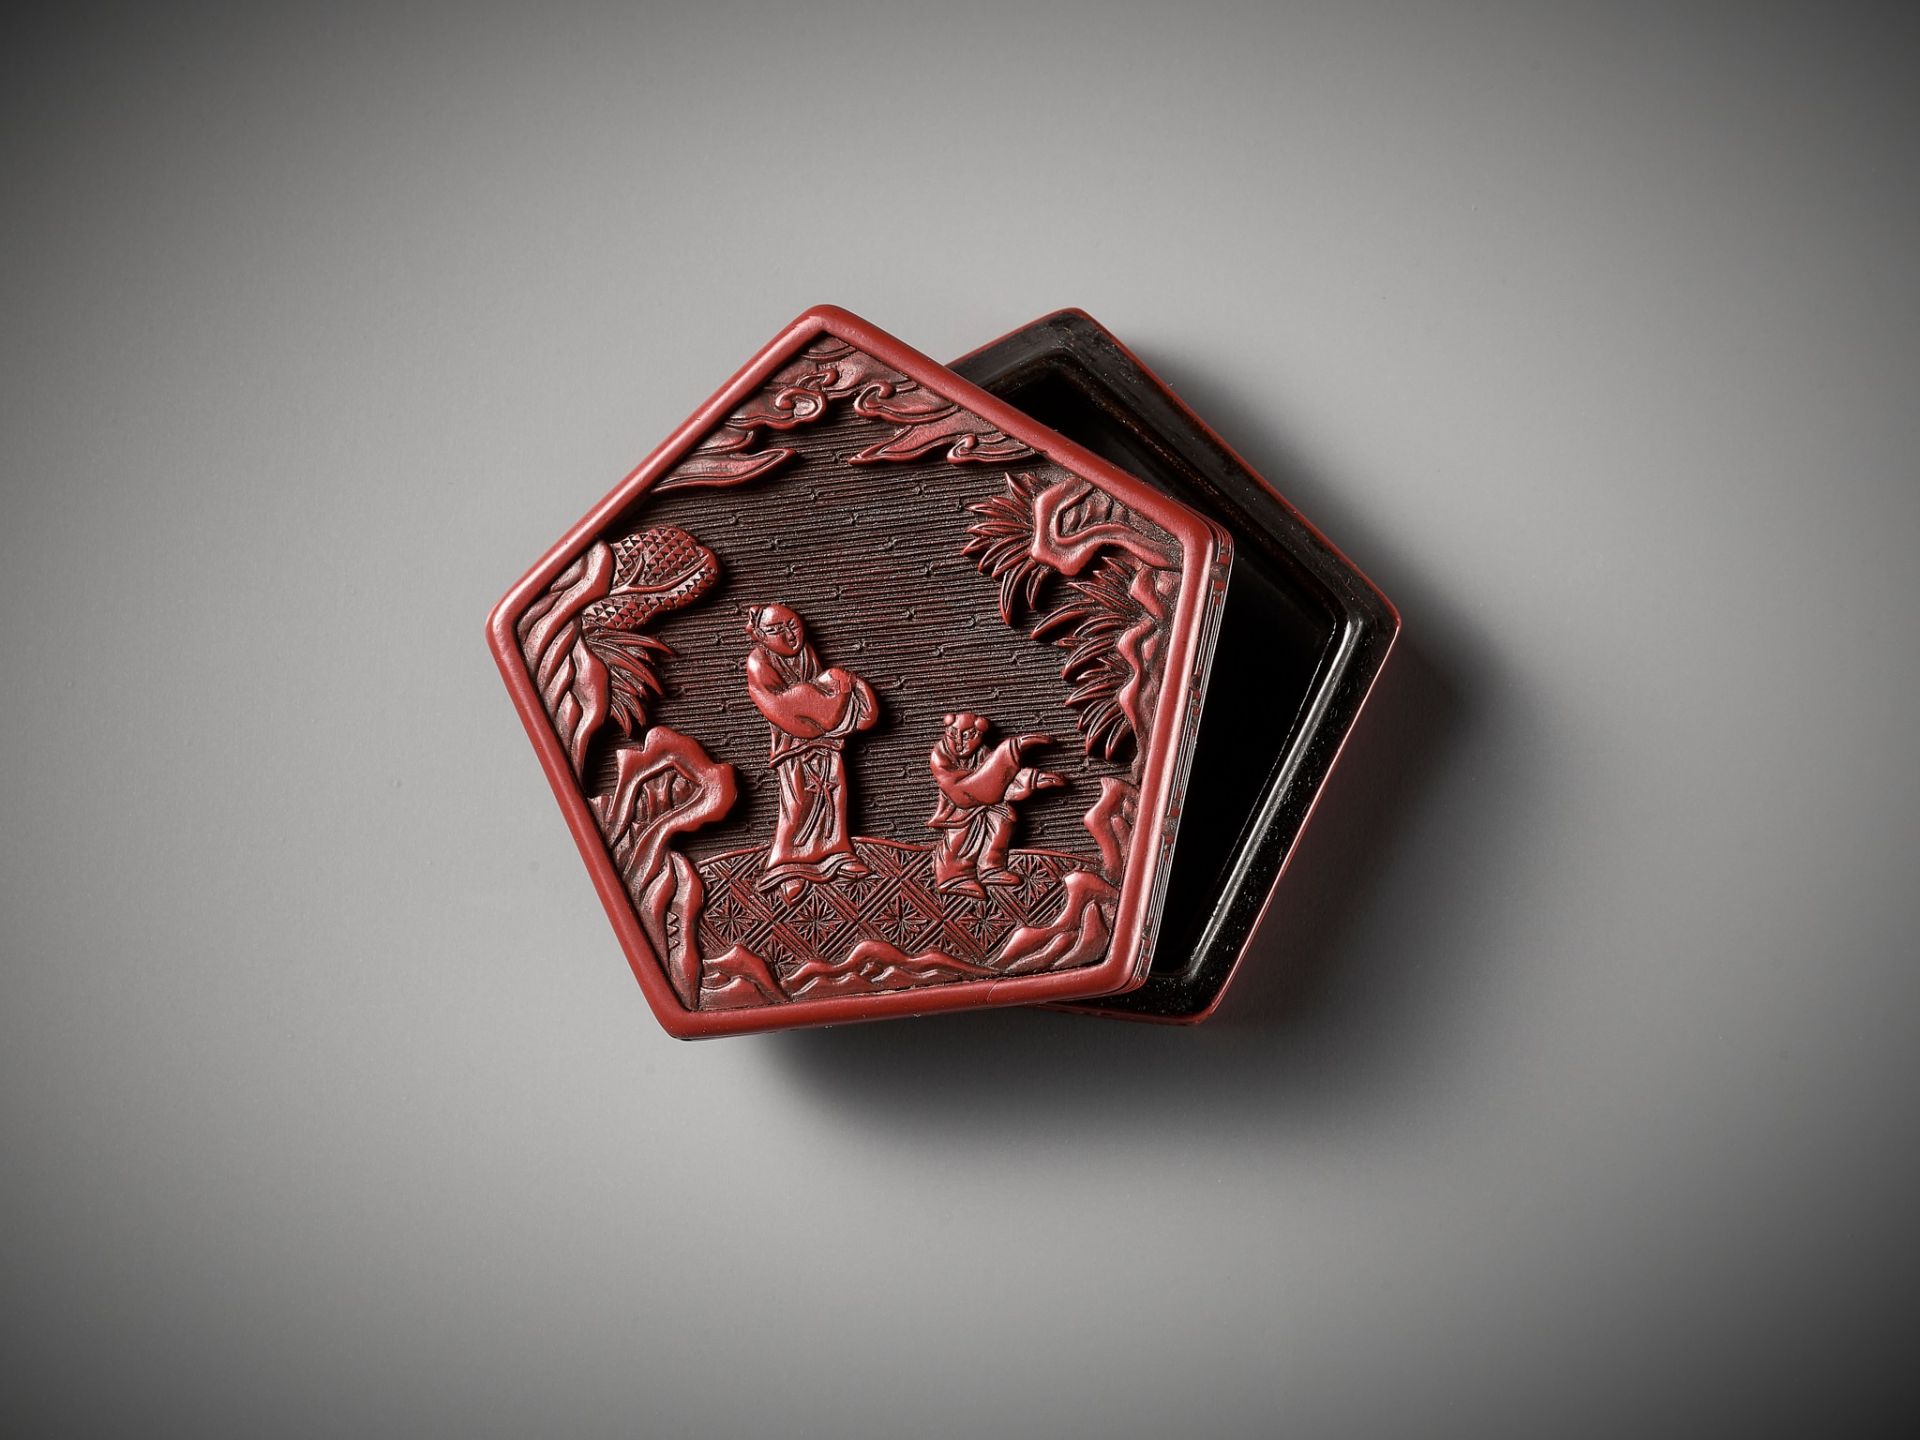 A SMALL CINNABAR LACQUER BOX AND COVER, YUAN TO MID-MING DYNASTY - Image 3 of 12